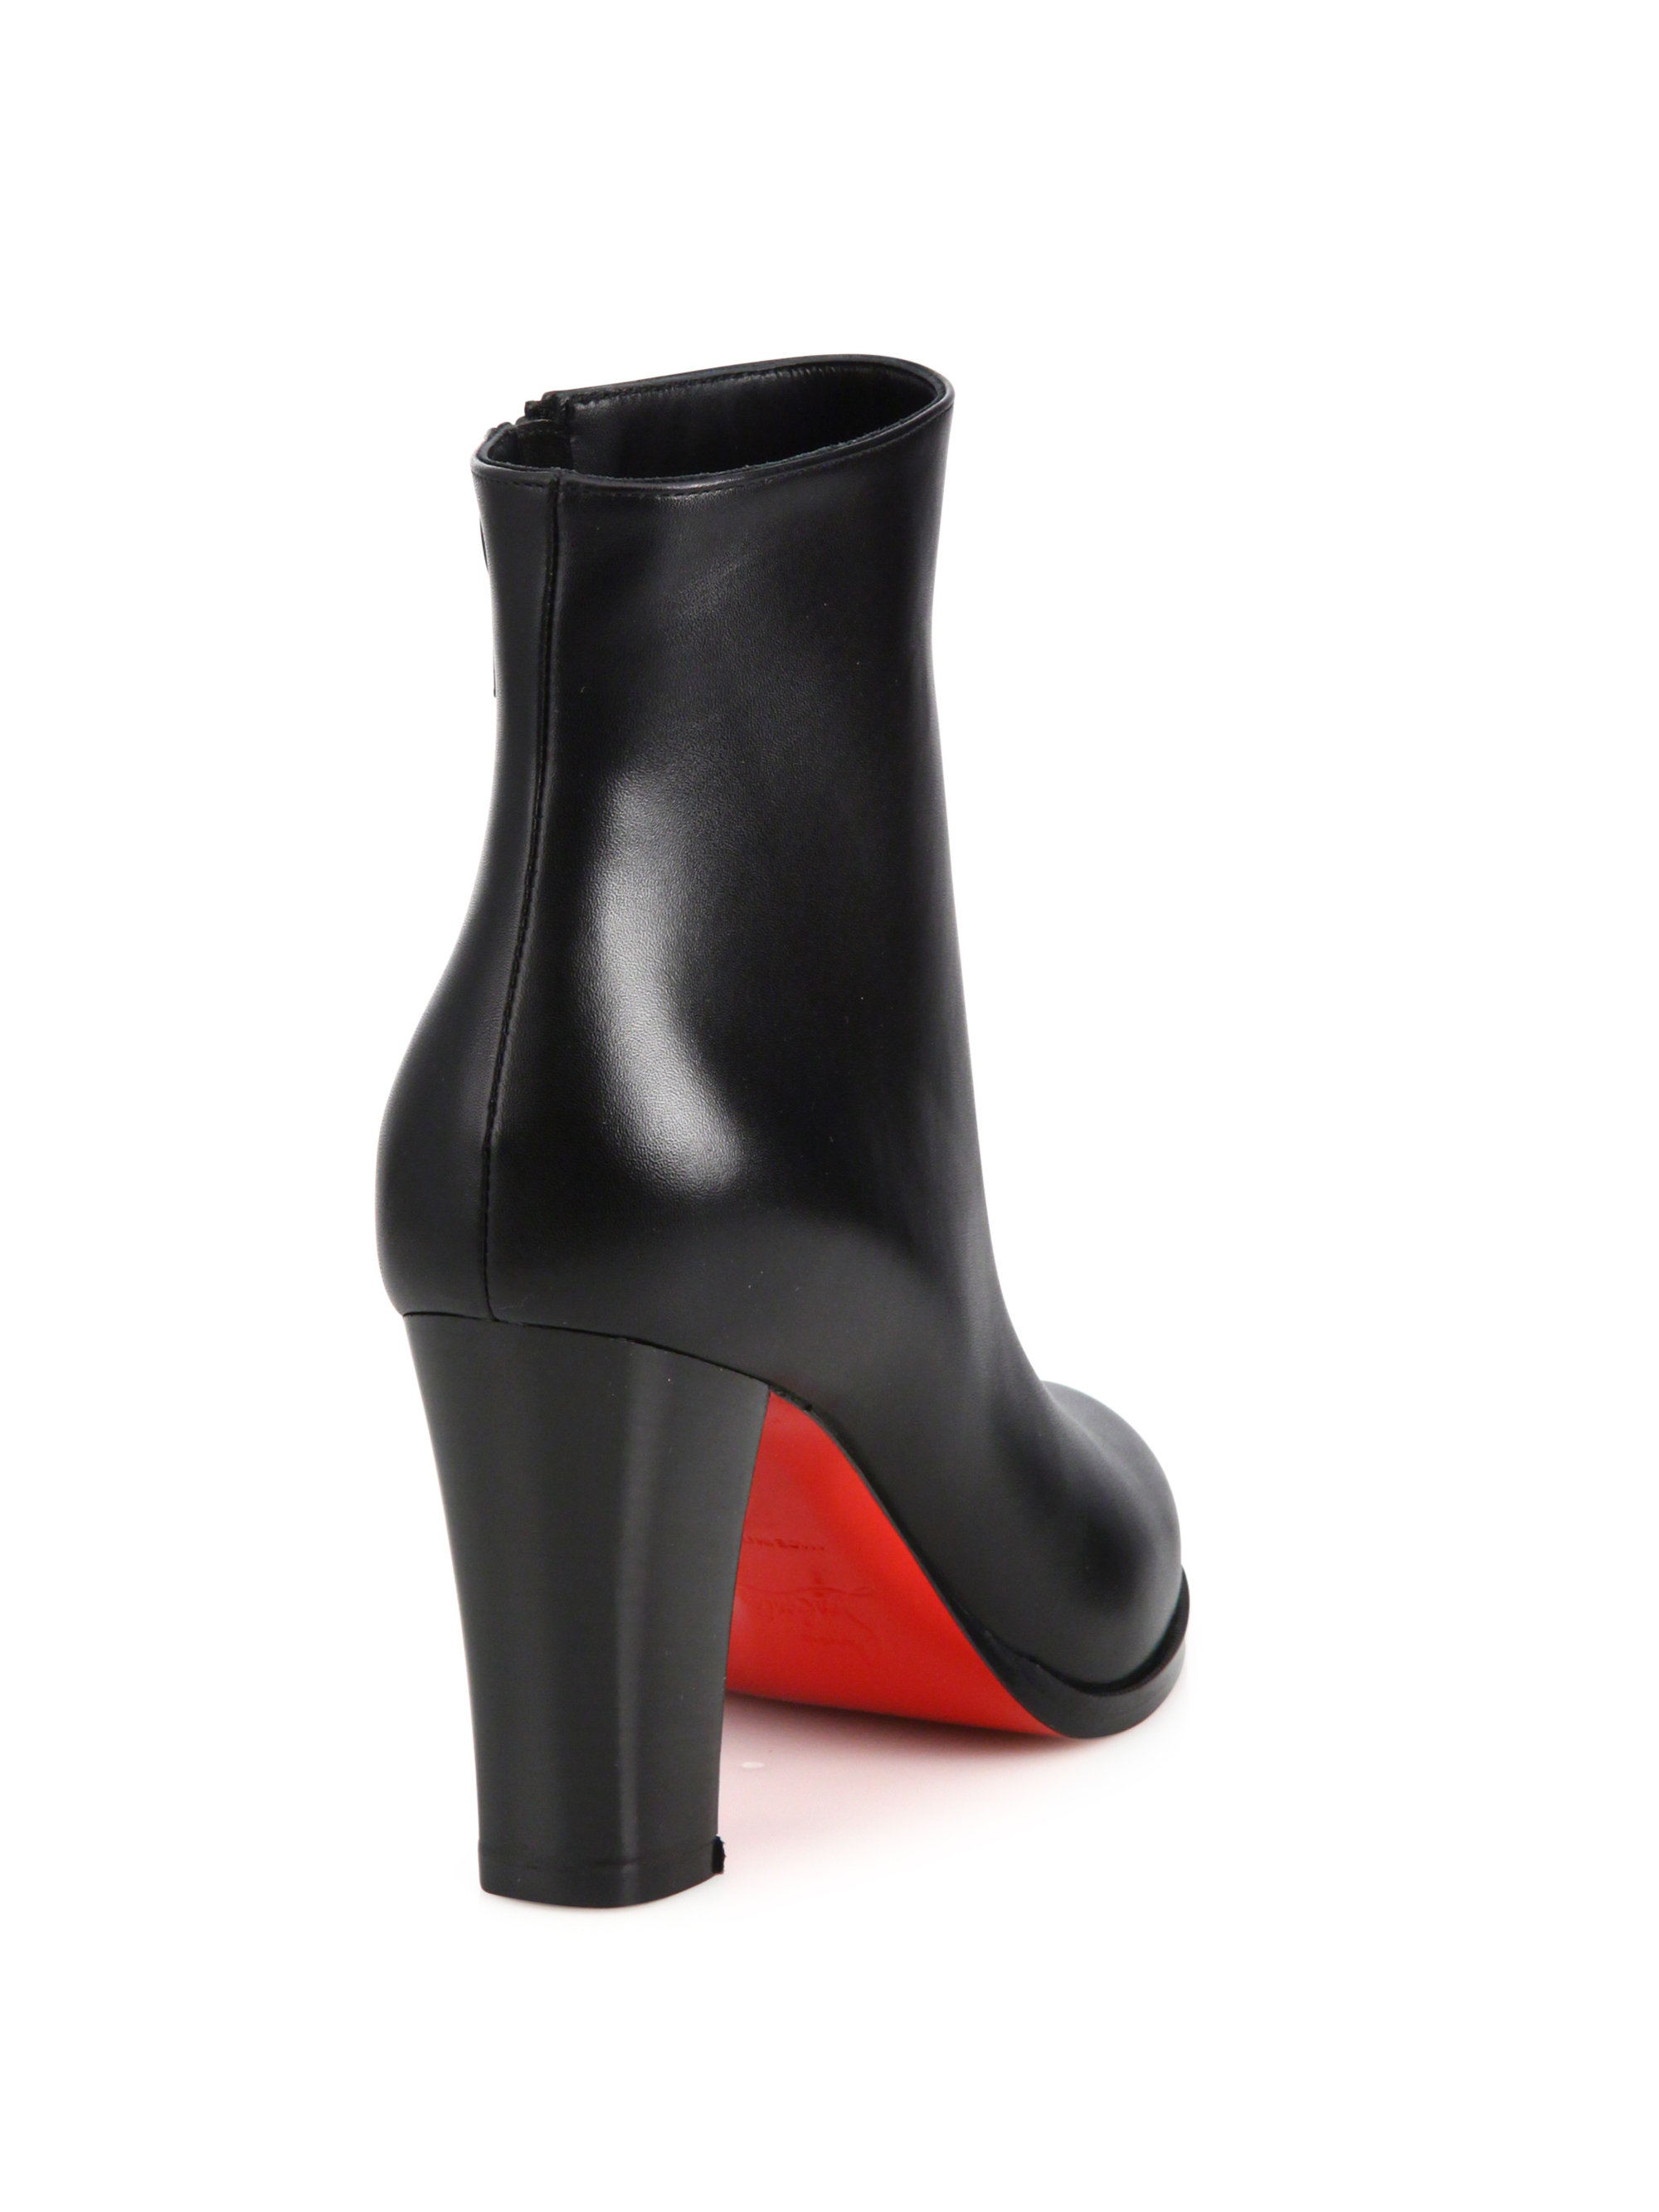 Christian Louboutin Adox 85 Leather Booties in Black | Lyst